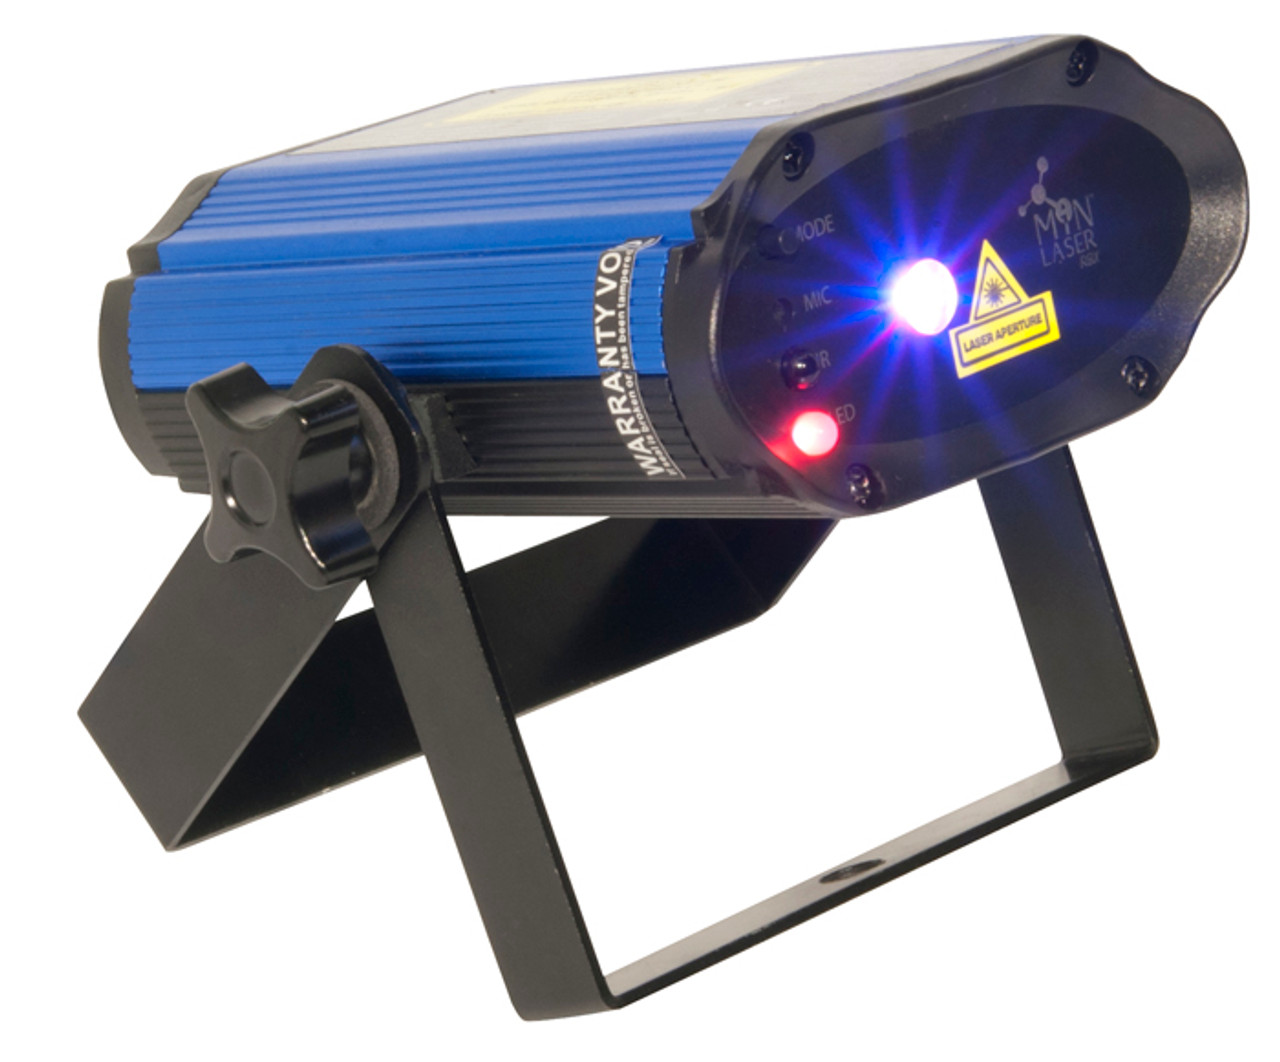 MiN Laser light RBX for nightclubs and bars